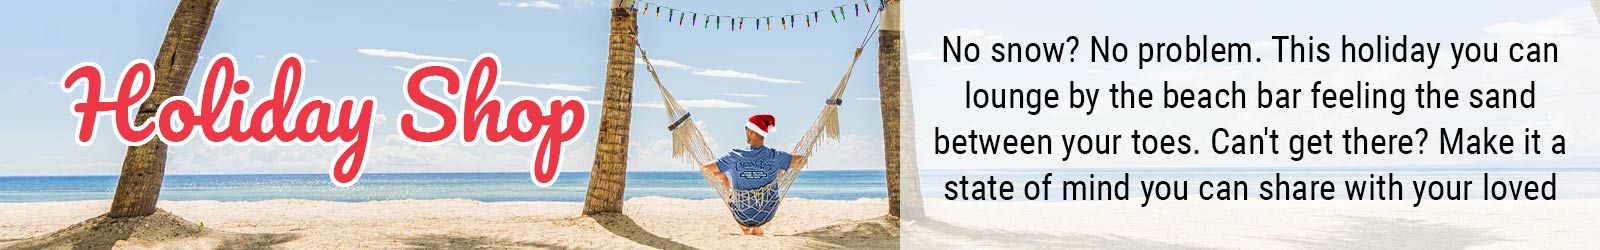 Island Jay's Holiday Shop Featuring Unique Beachy Items For the Christmas & Holiday Season